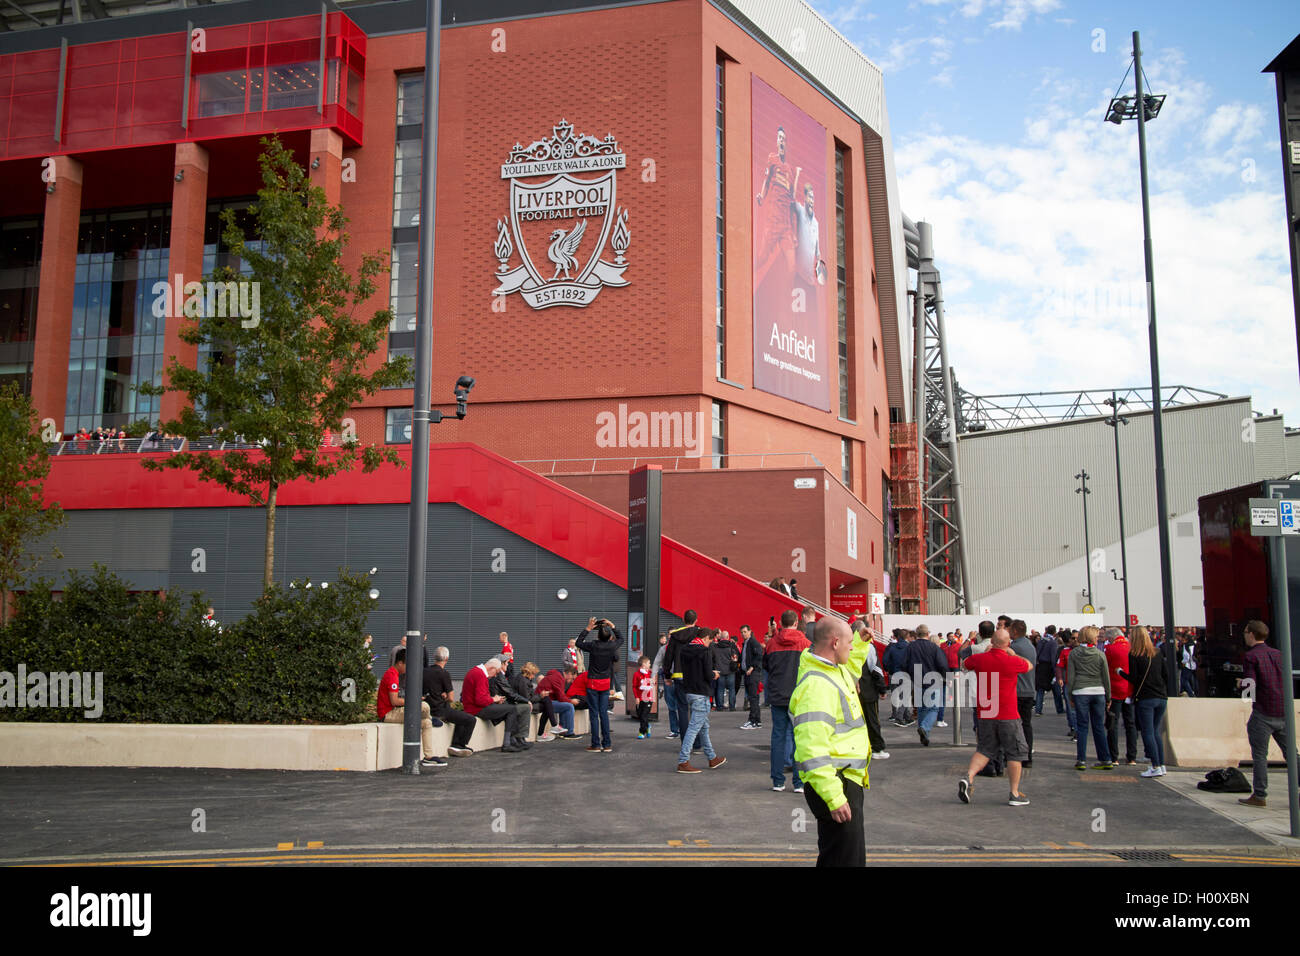 crowds at The new main stand at Liverpool FC anfield stadium Liverpool Merseyside UK Stock Photo